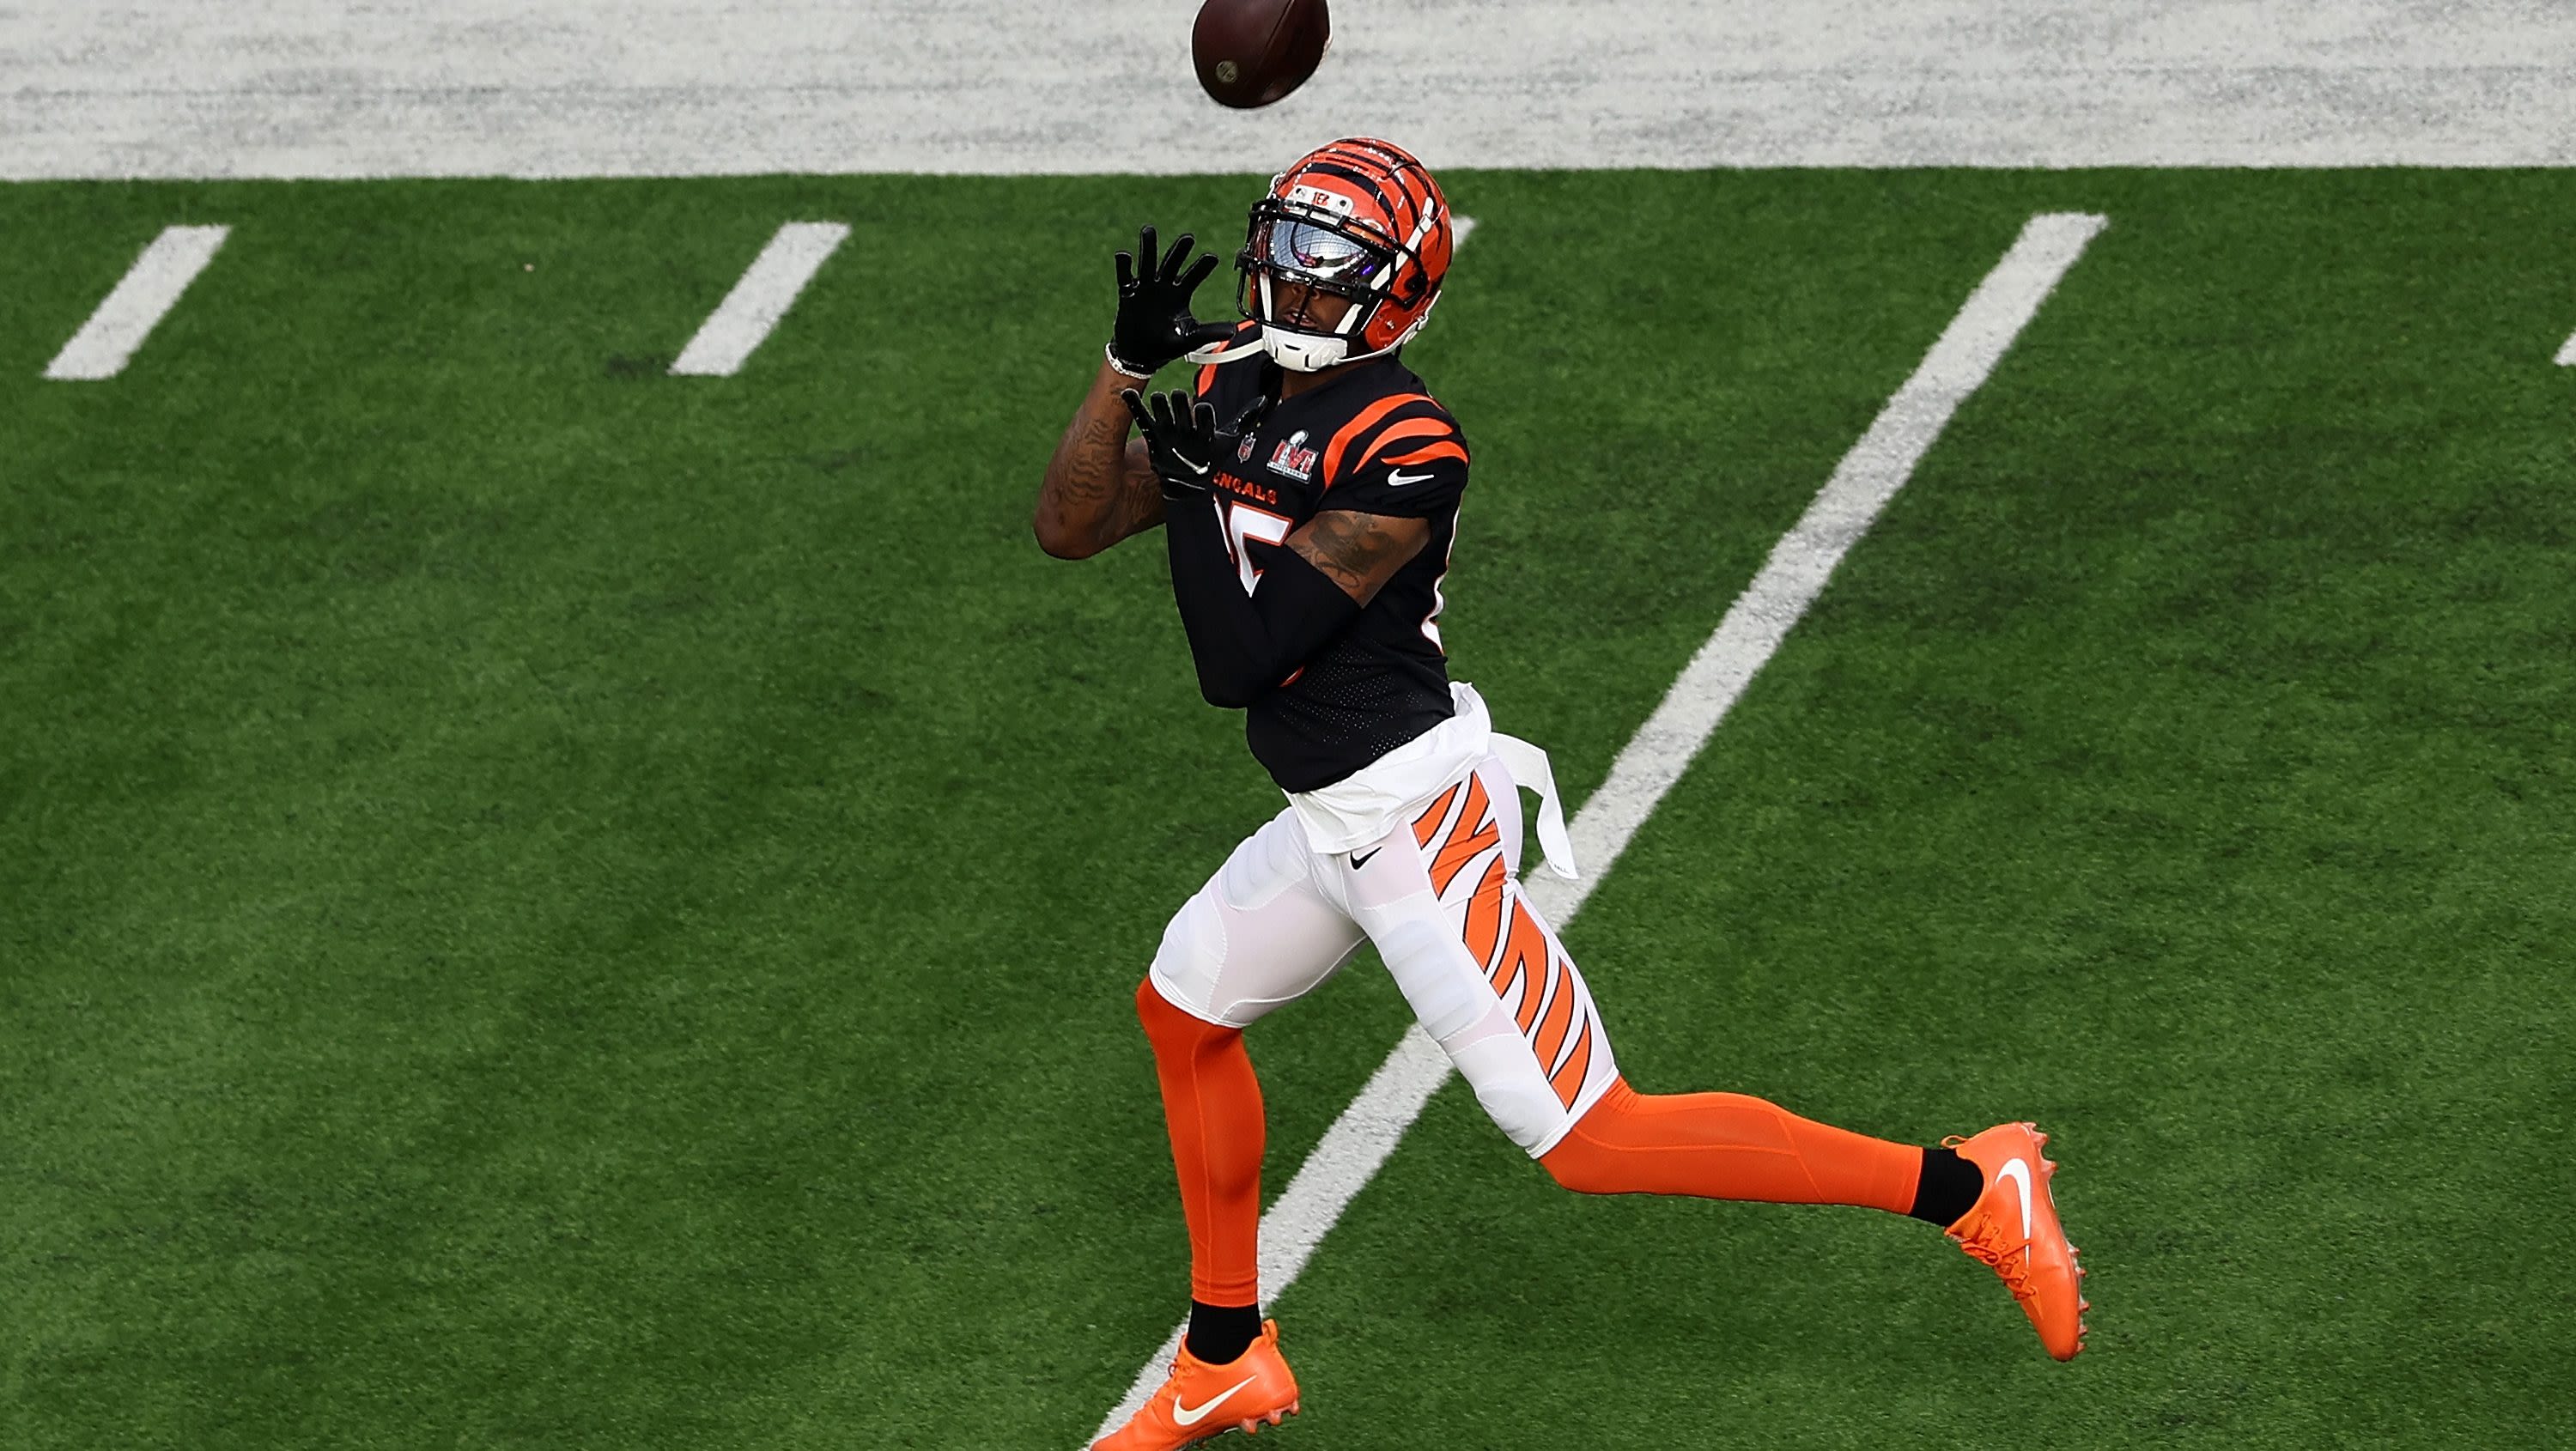 Blockbuster Trade Proposal Sends Bengals’ WR to AFC South